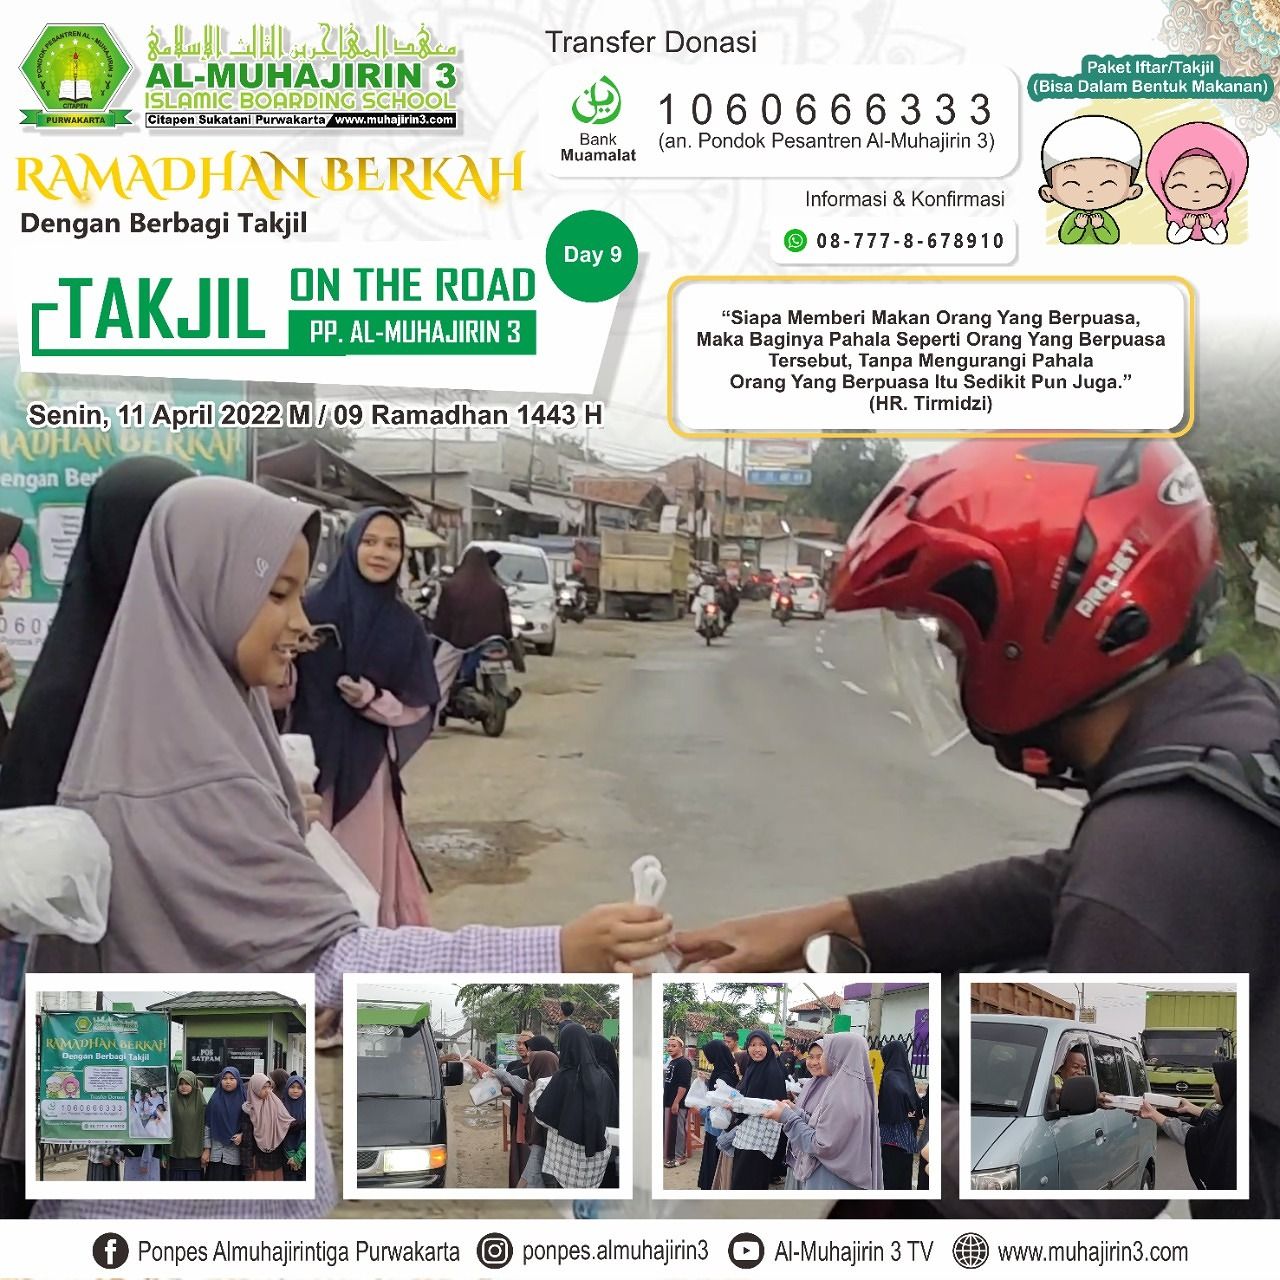 Takjil On The Road 1443 H